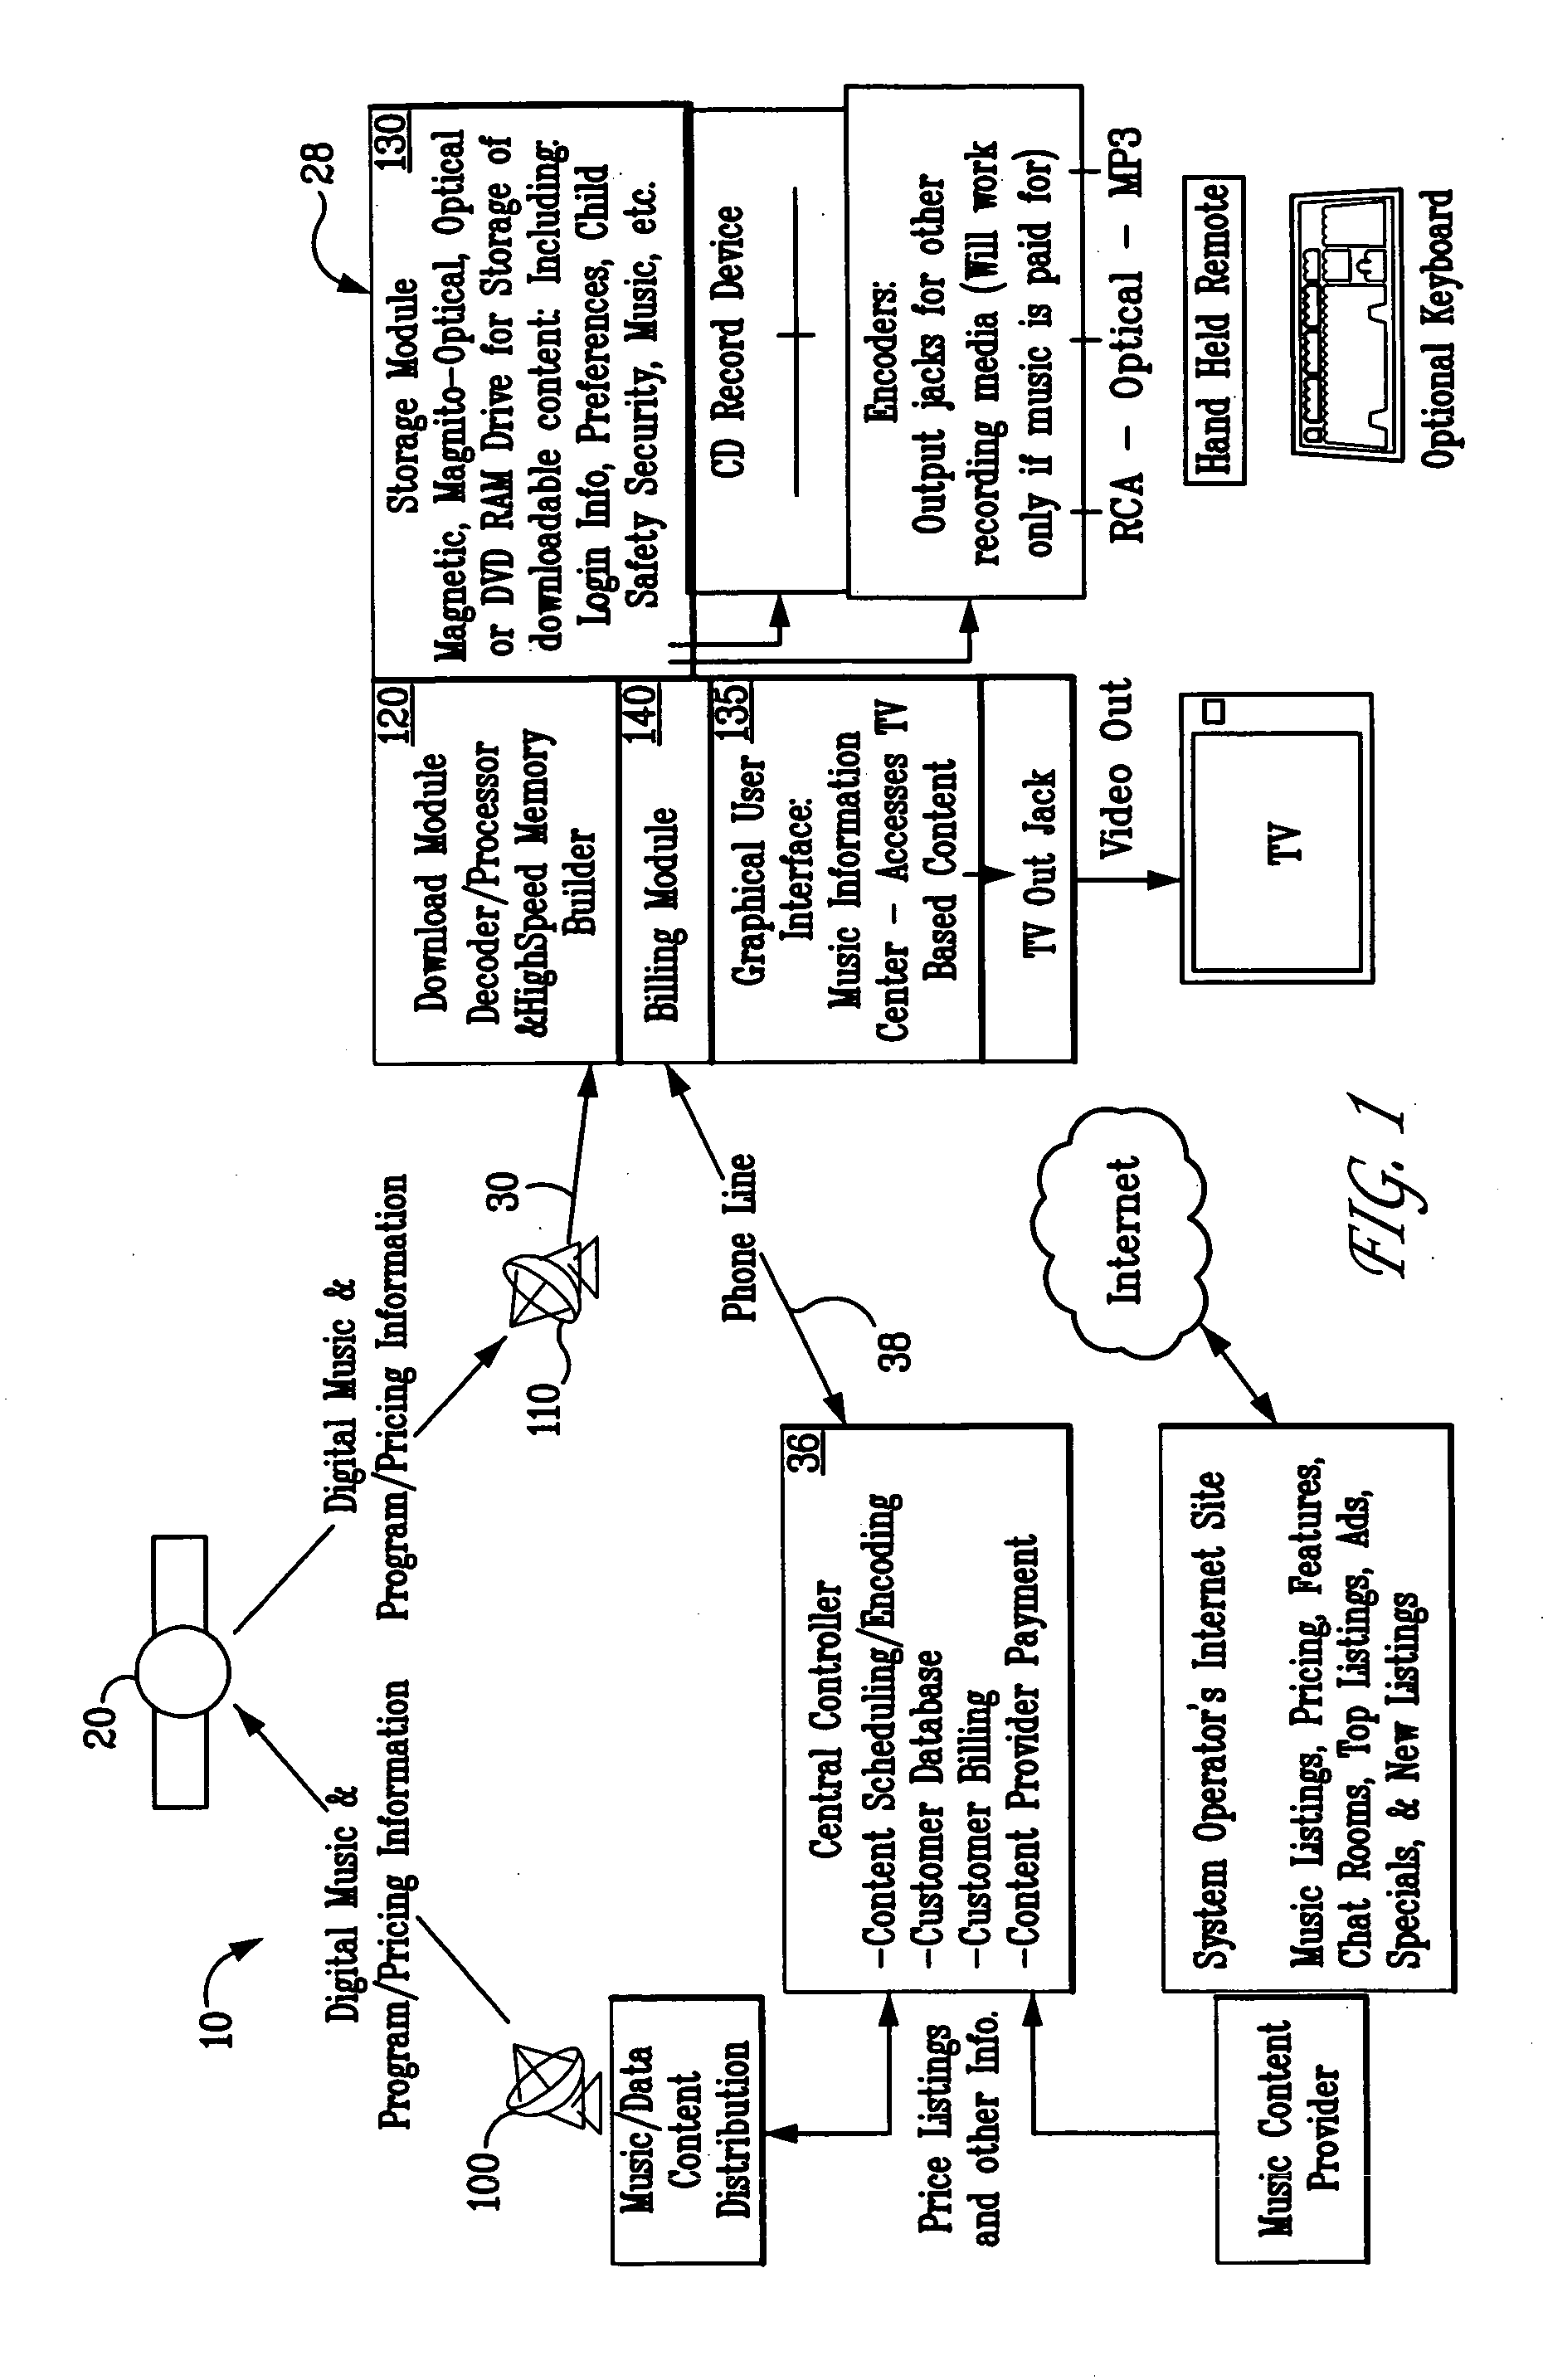 Music distribution system and associated antipiracy protection